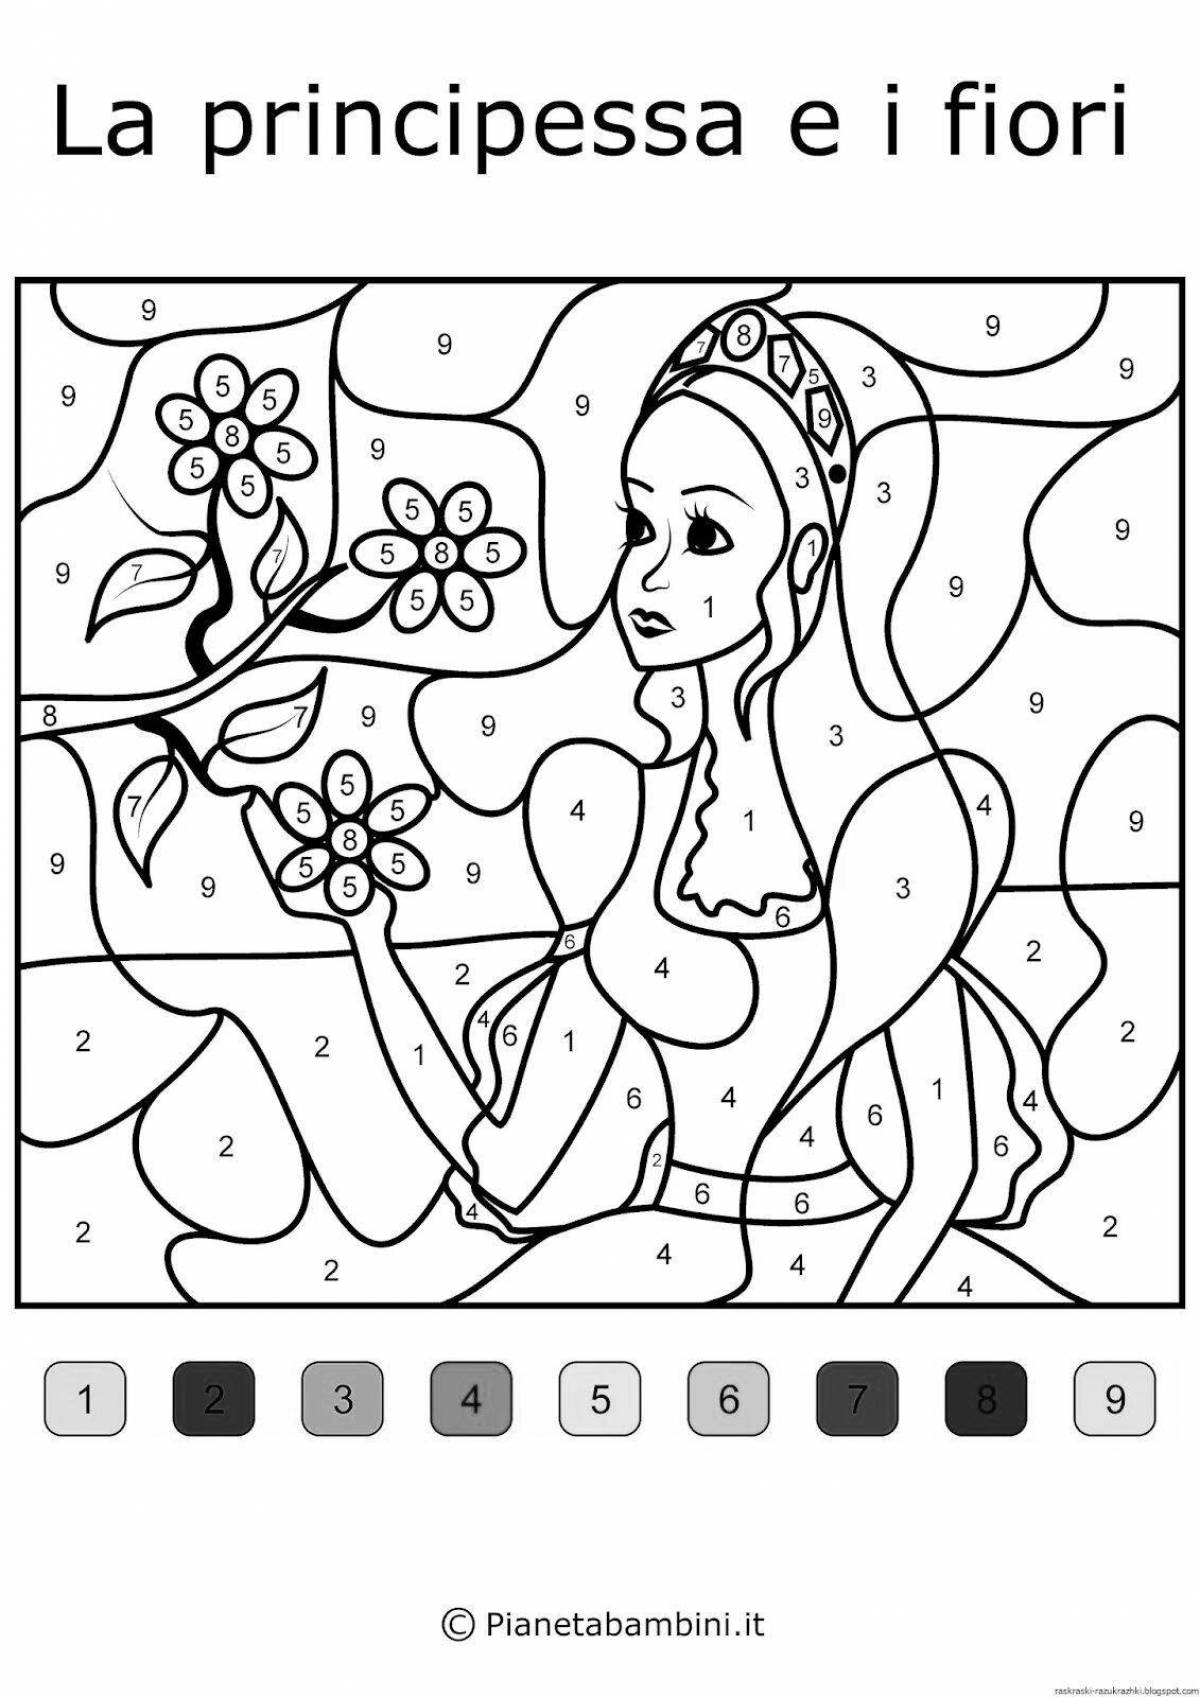 Fun coloring pages for girls 6 years old